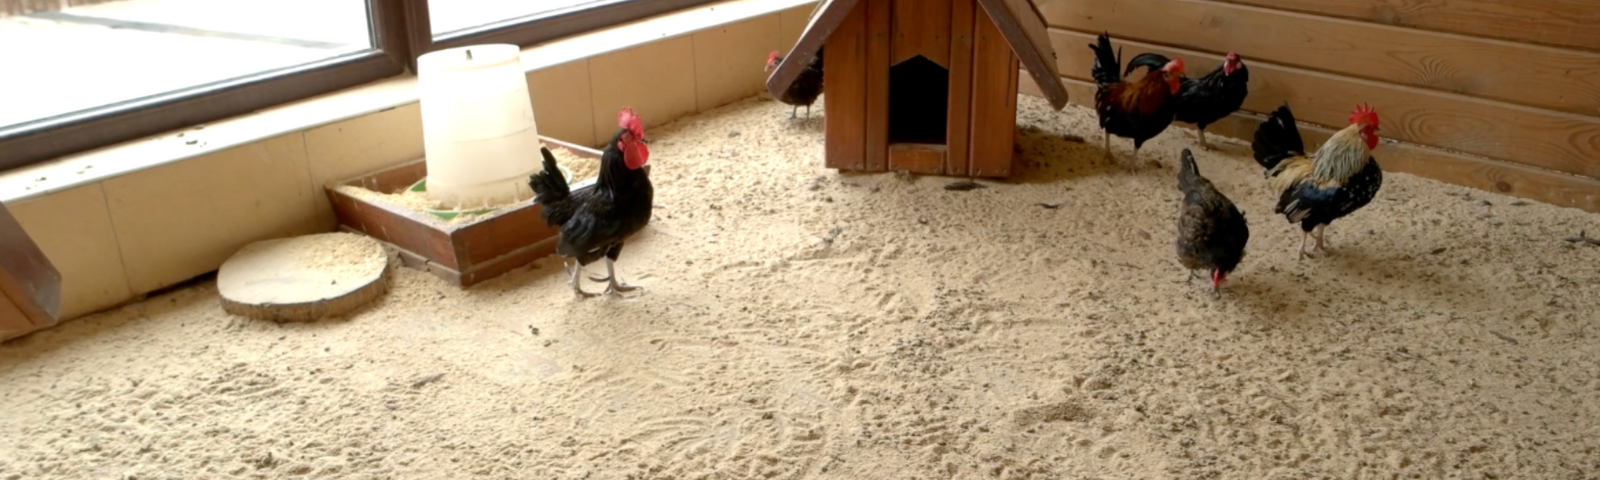 What Kind of Bedding Should I Use in My Chicken Coop?